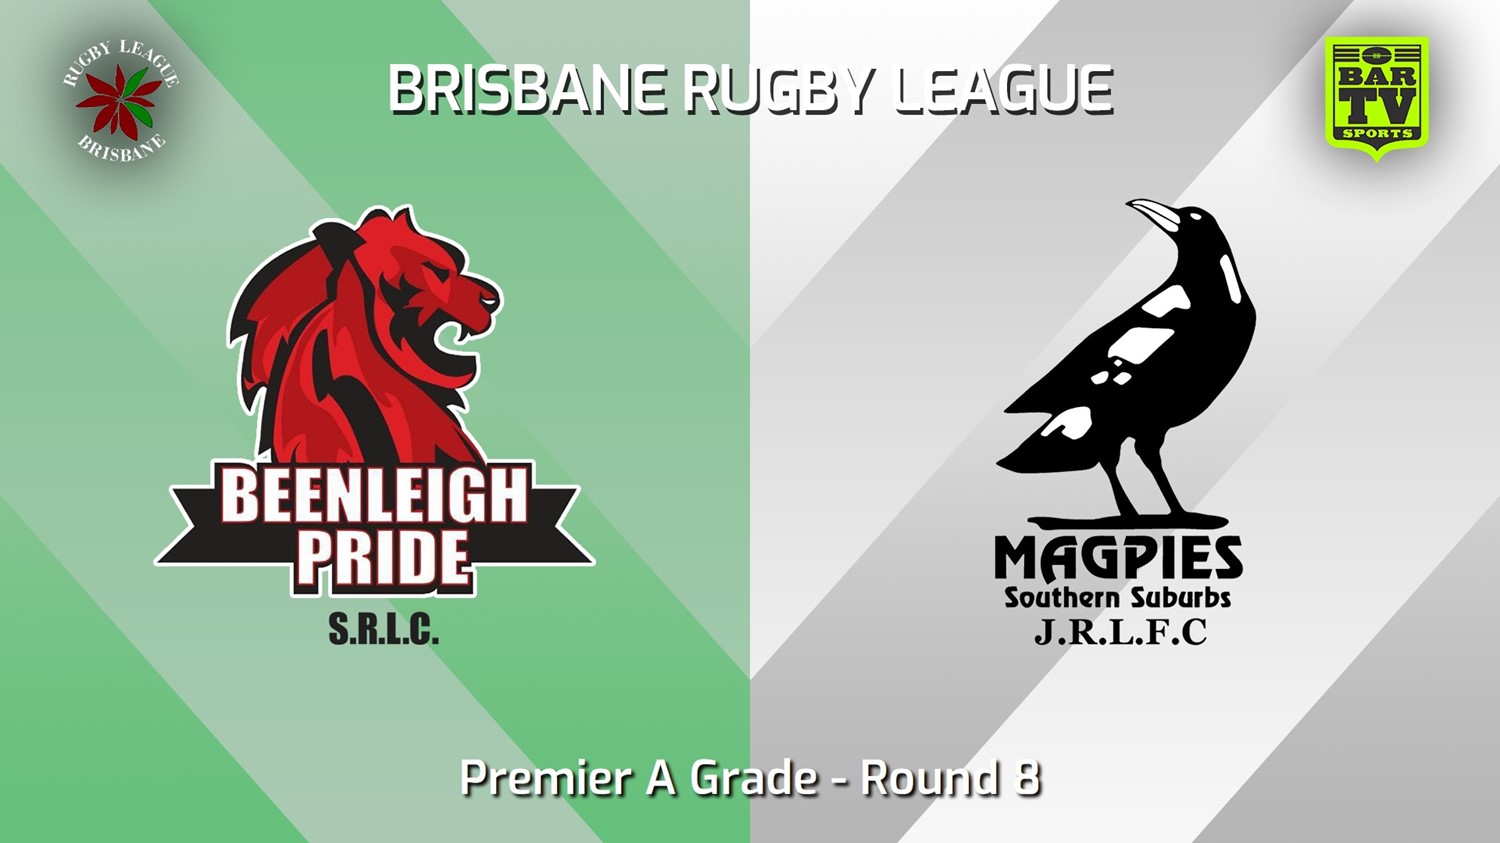 240601-video-BRL Round 8 - Premier A Grade - Beenleigh Pride v Southern Suburbs Magpies Minigame Slate Image